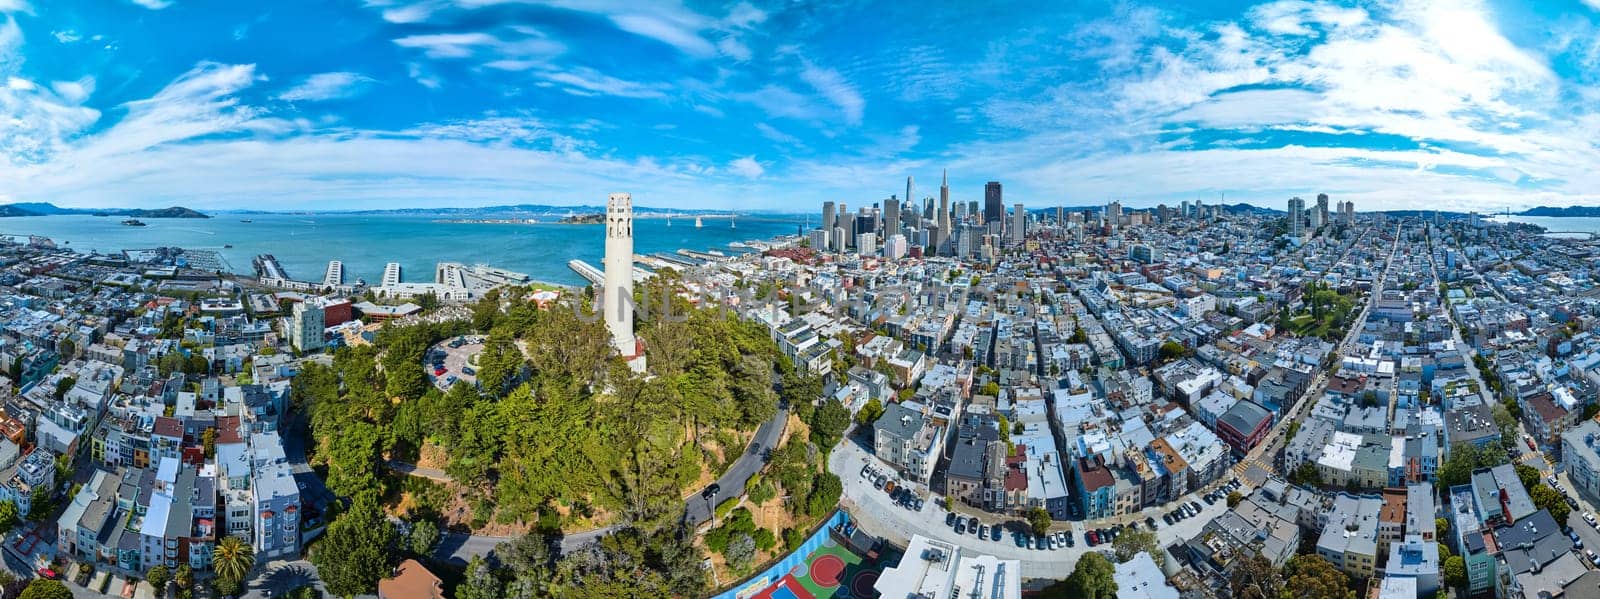 Gorgeous San Francisco city aerial downtown with Coit Tower on blue sky day by njproductions